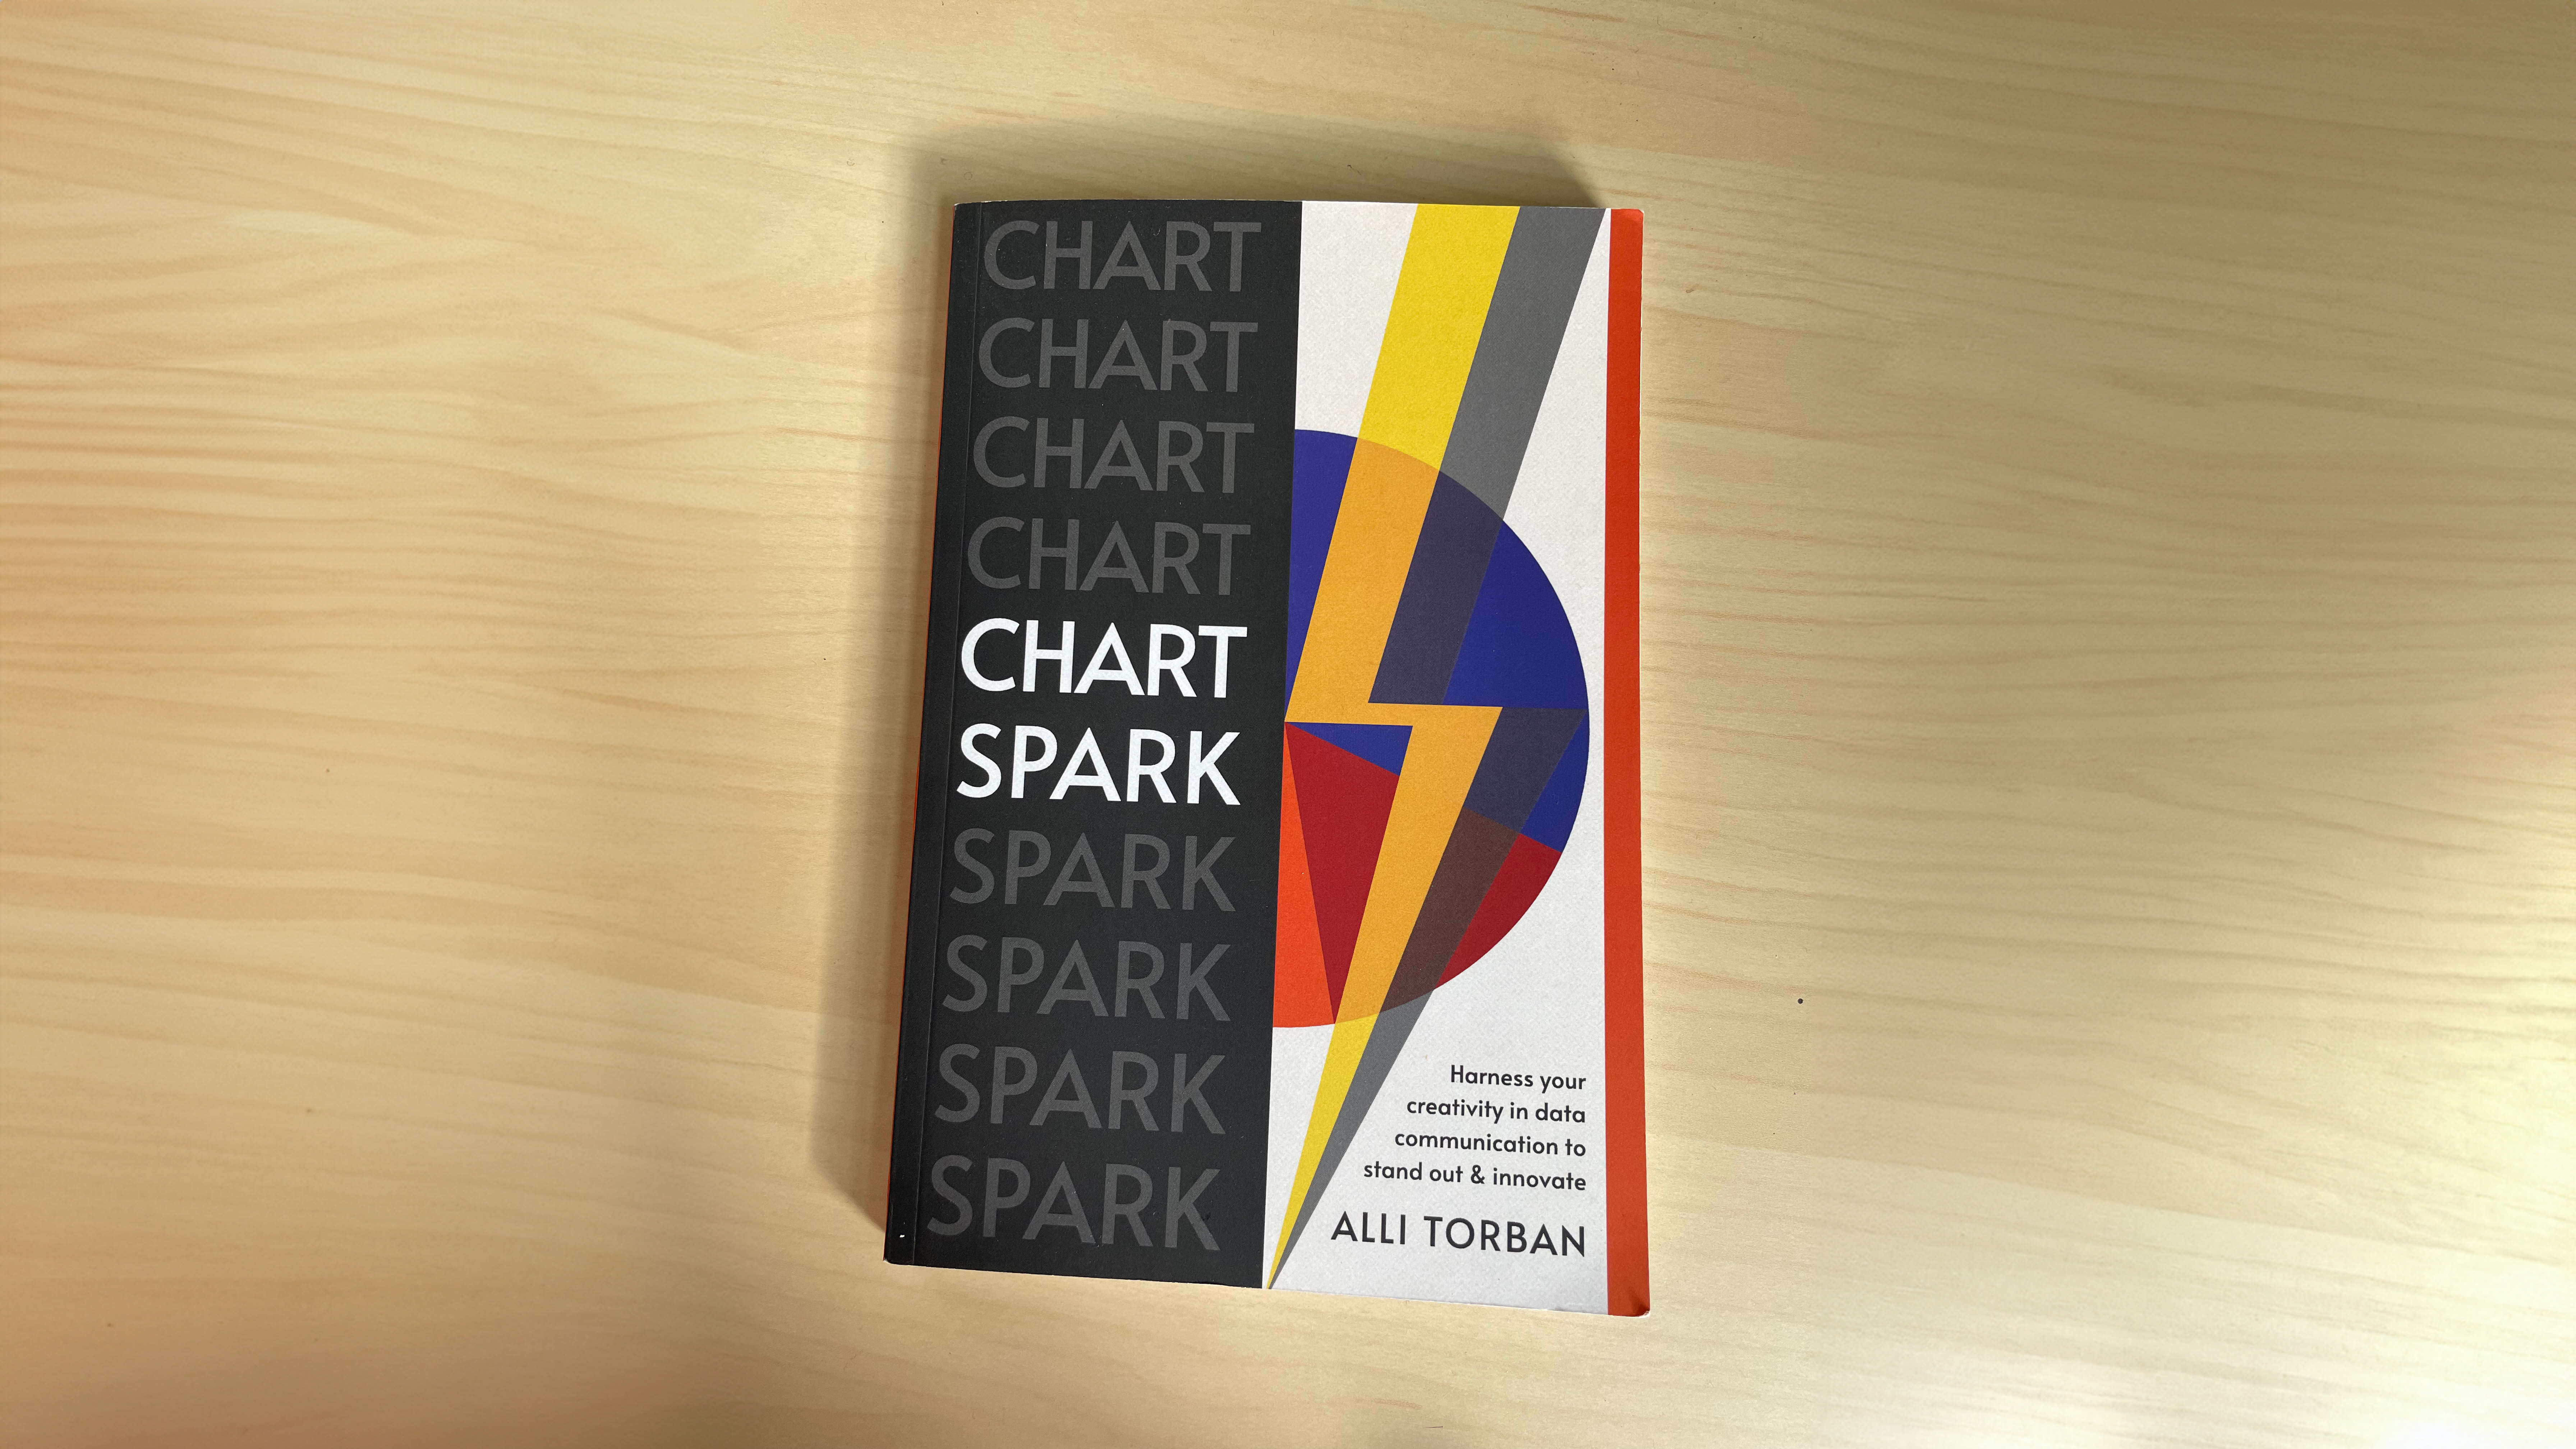 A book cover with the title "Chart Spark: Harness your creativity in data communication to stand out & innovate by Alli Torban" A lightning bolt going through a pie chart covers the right side of the cover while the title Chart Spark is repeated going down the left.